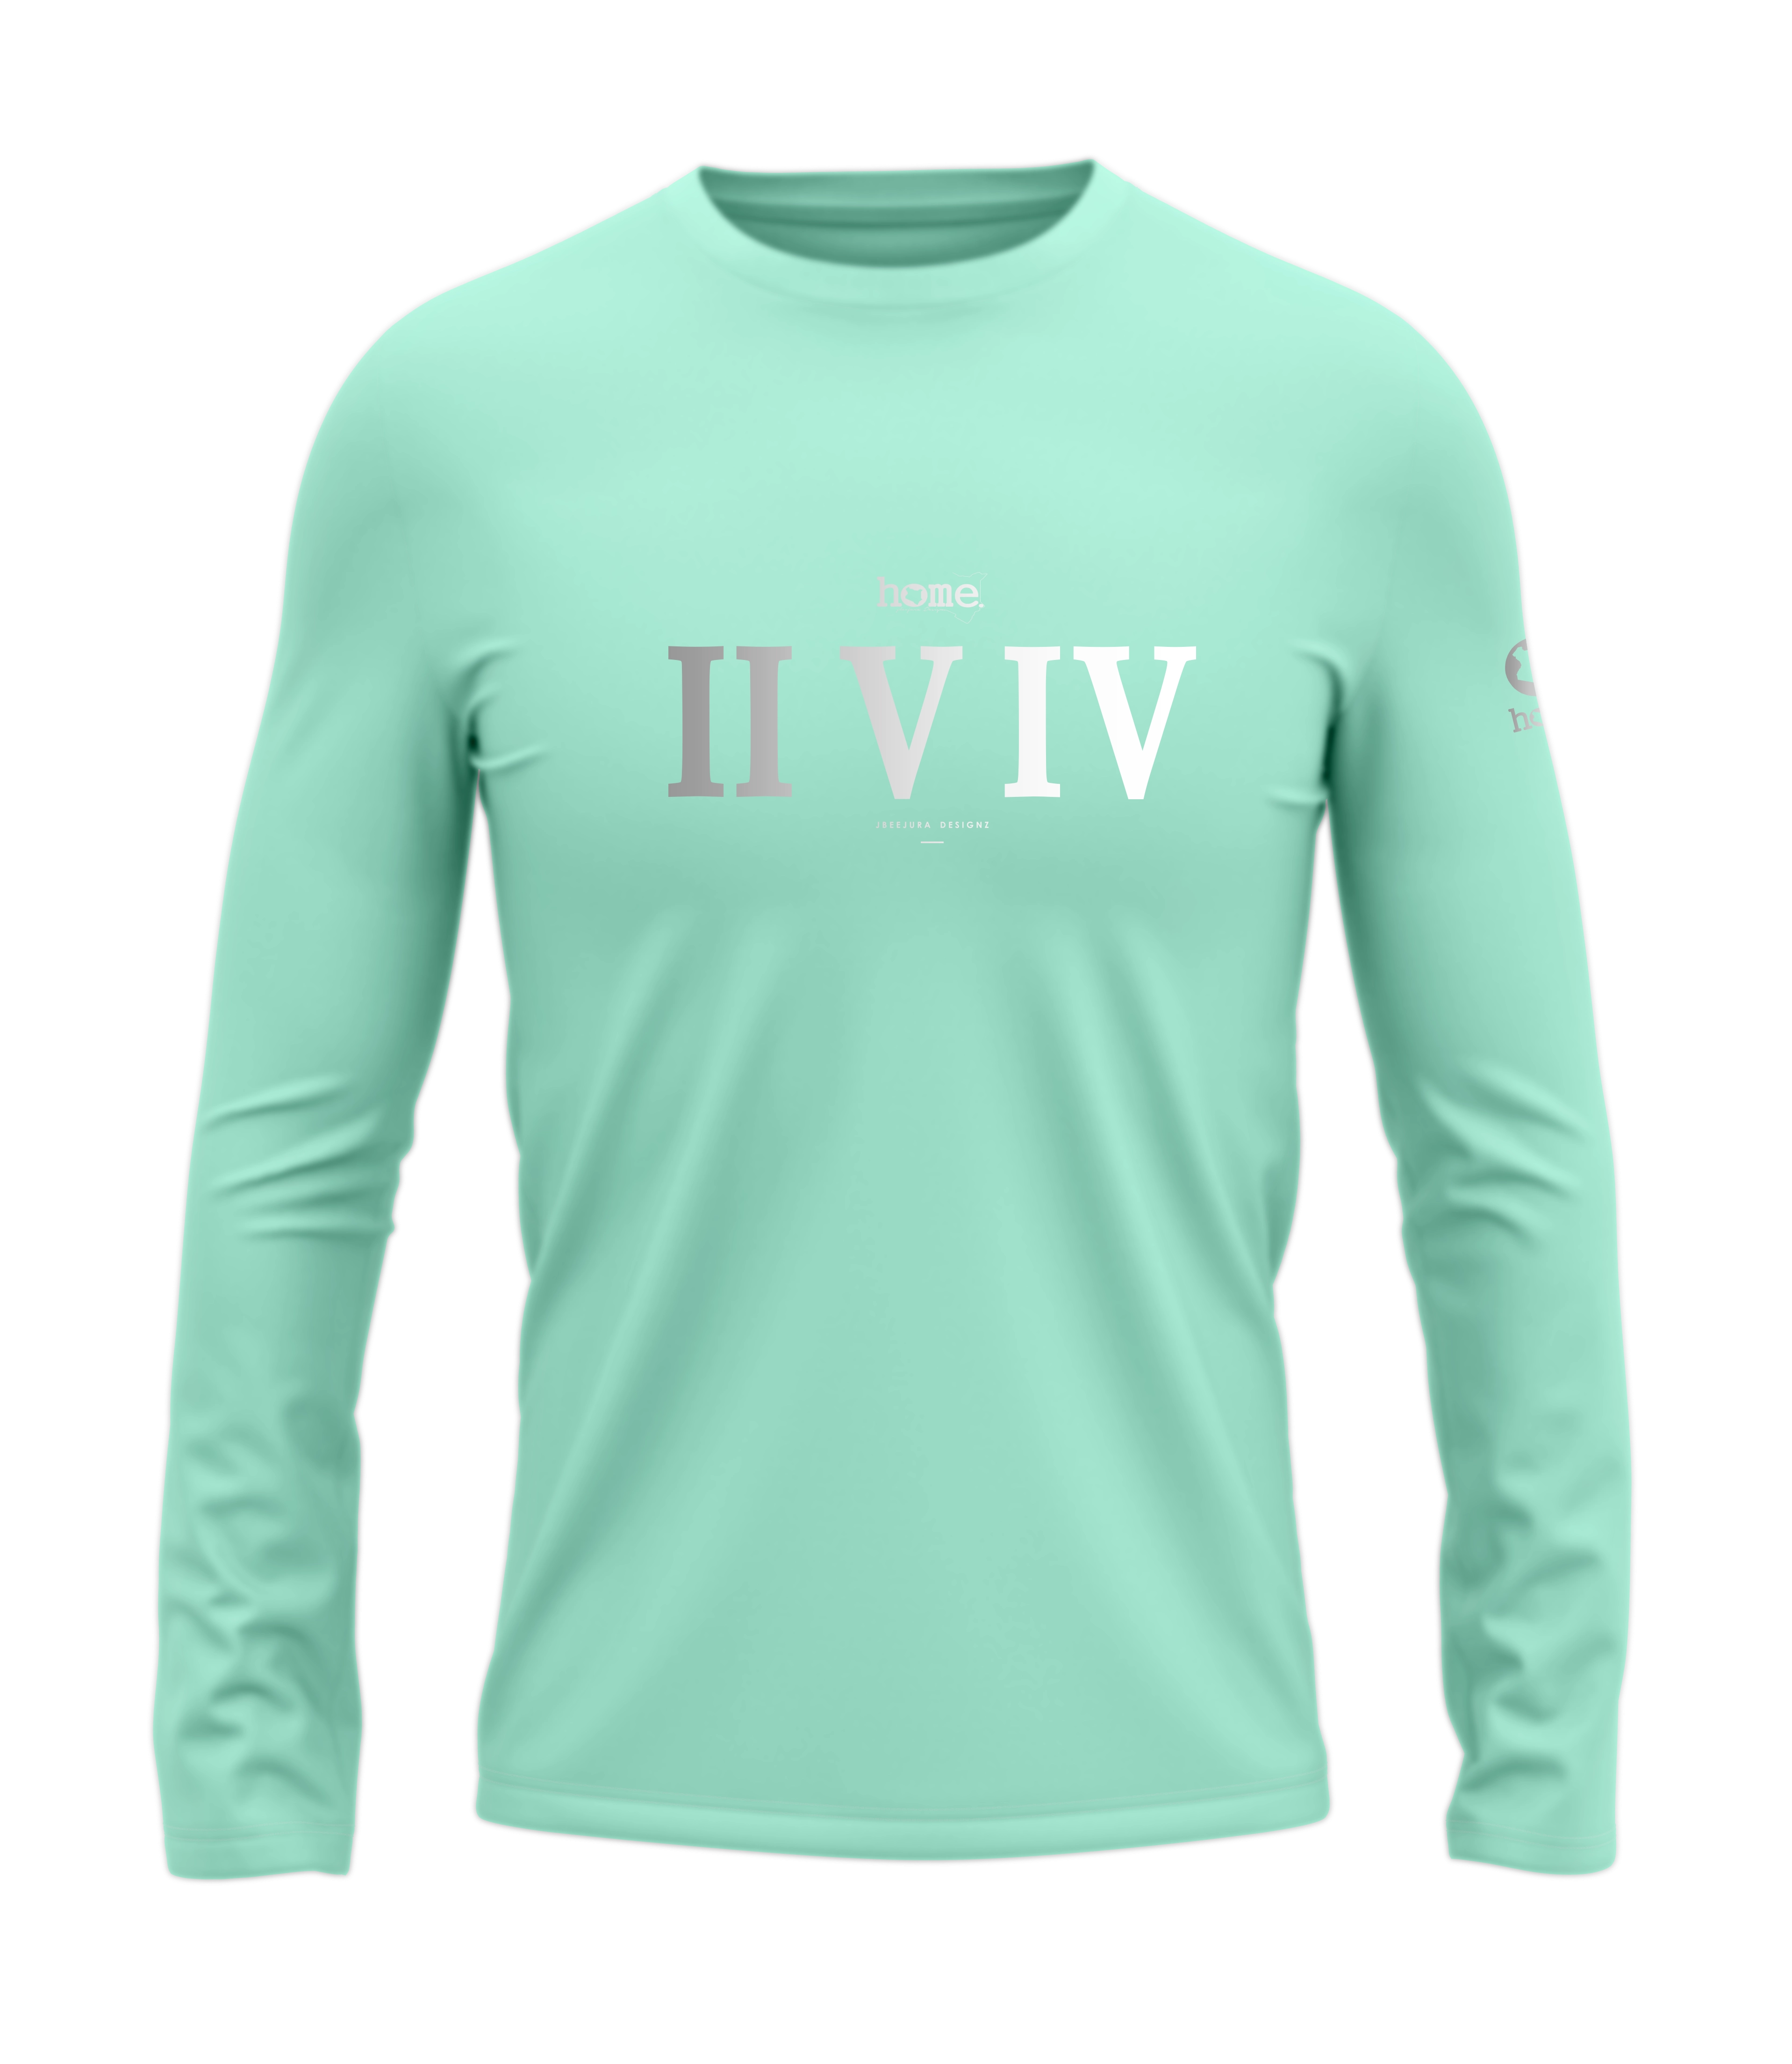 home_254 LONG-SLEEVED TURQUOISE GREEN T-SHIRT WITH A SILVER ROMAN NUMERALS PRINT – COTTON PLUS FABRIC